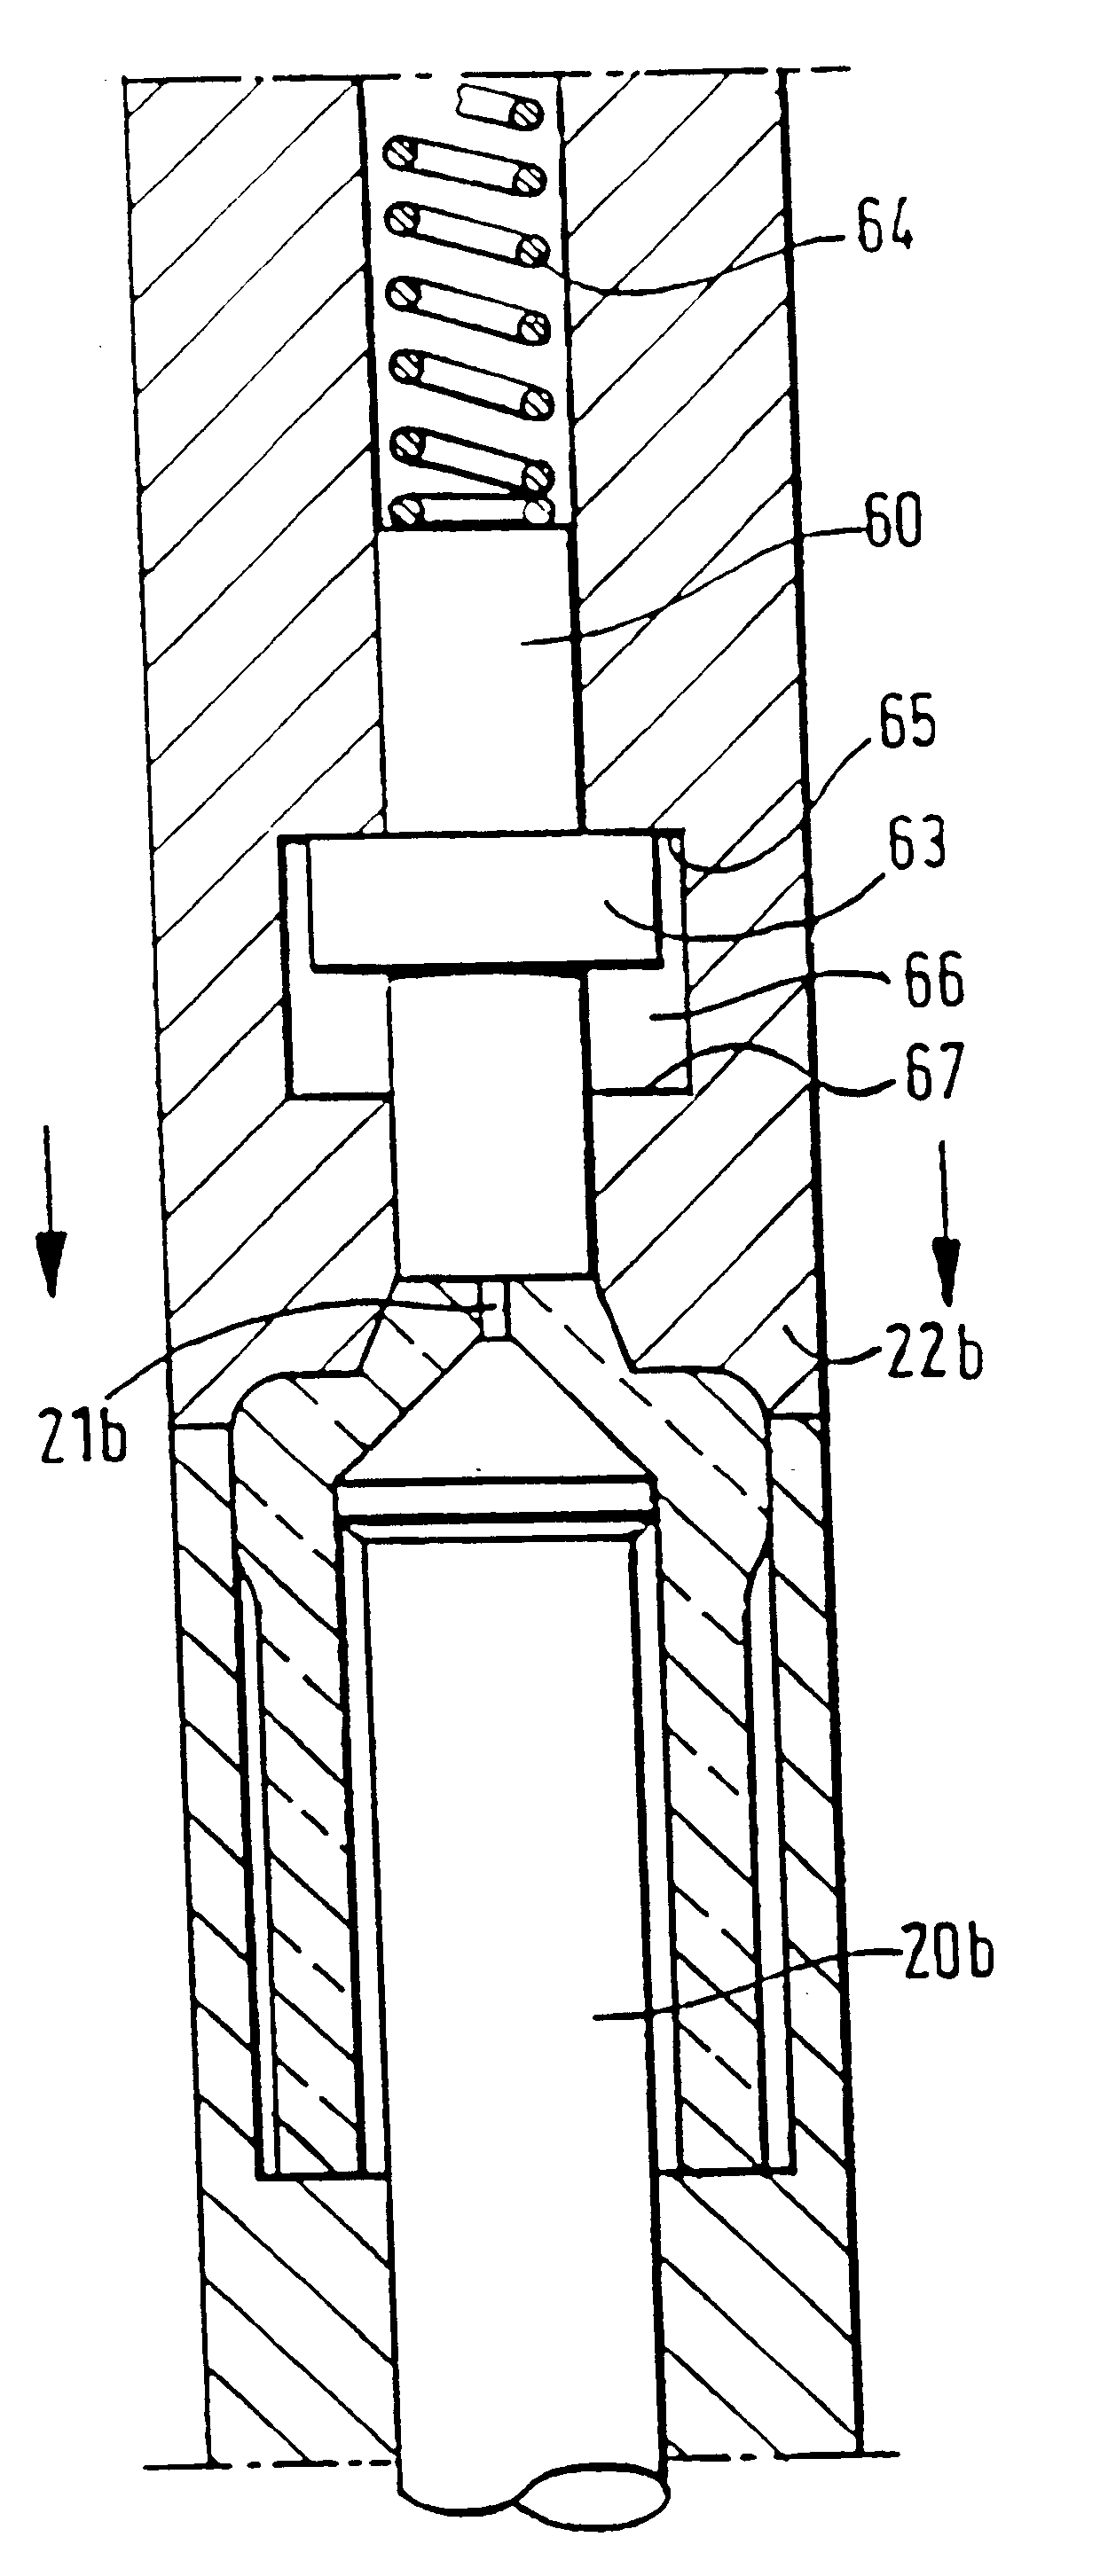 Method and apparatus for making an article from a formable material